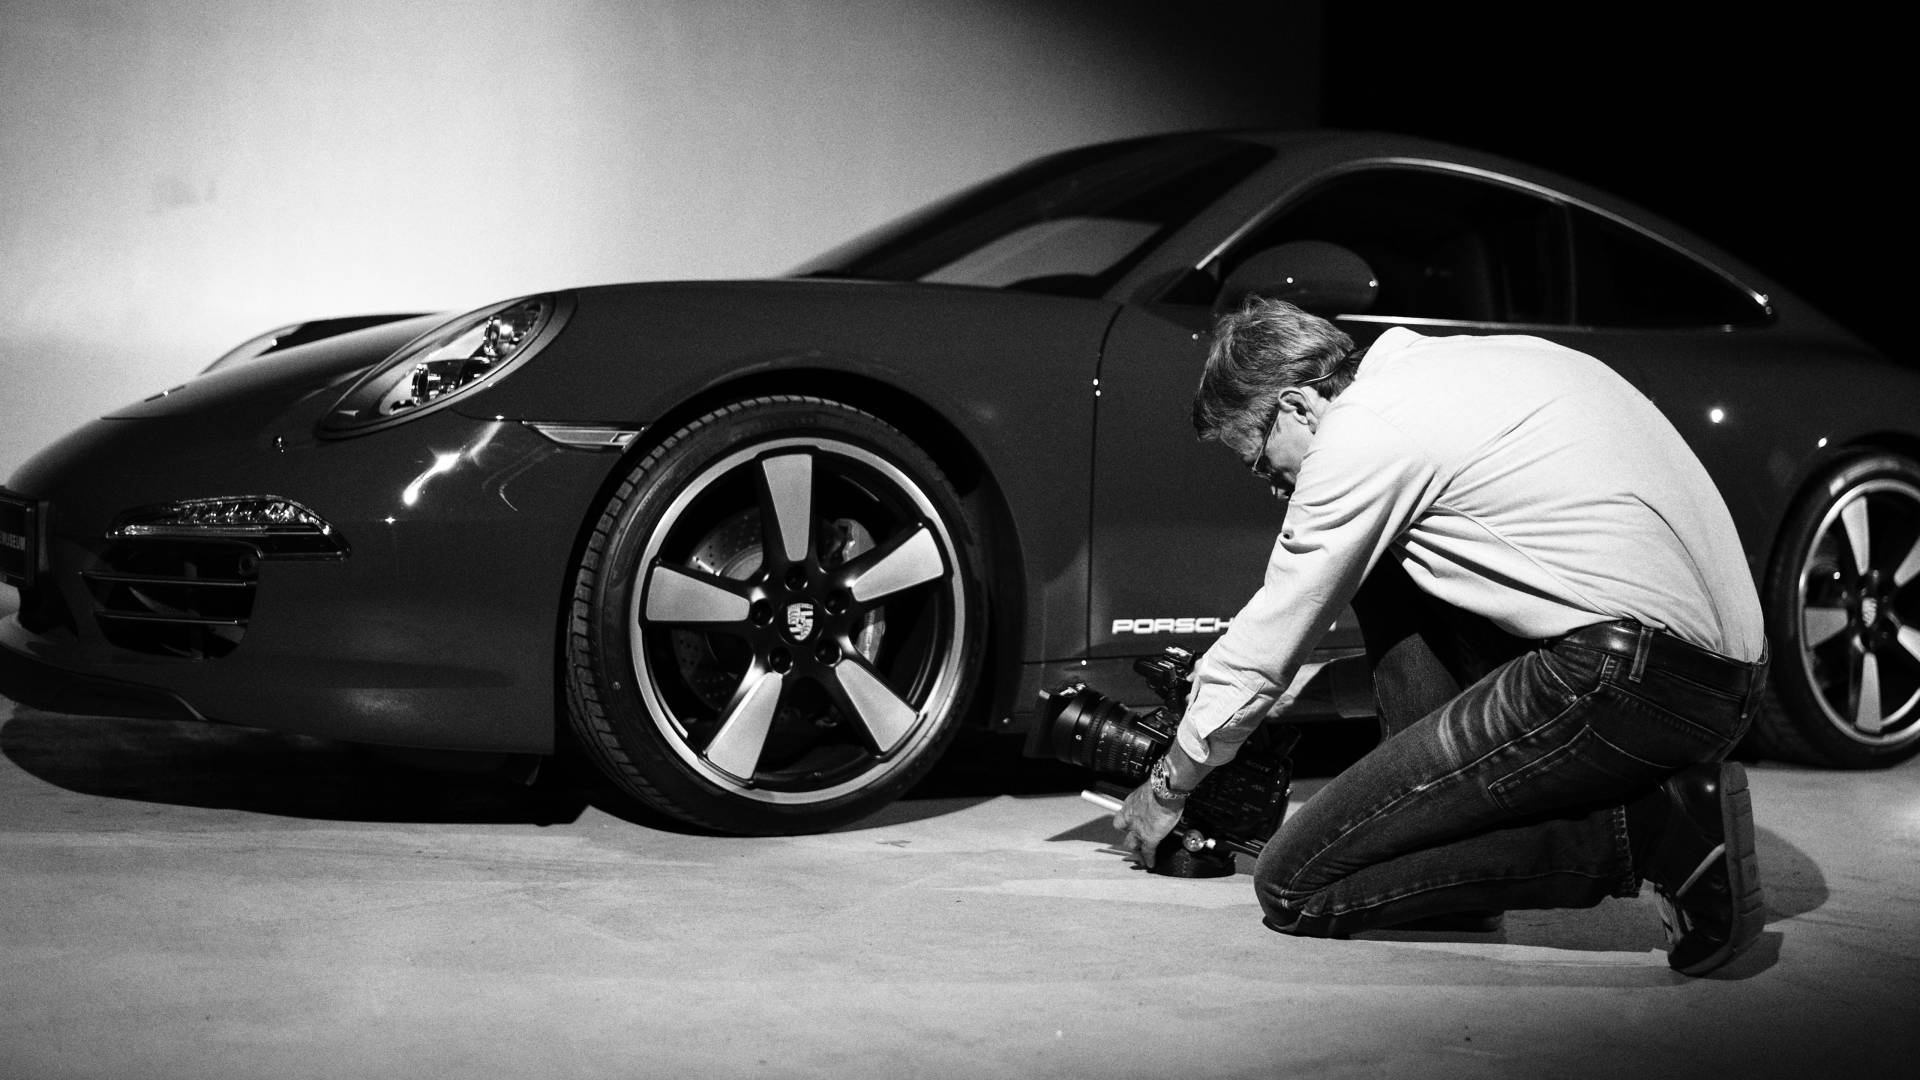 Black and white shot of the Porsche with the cameraman